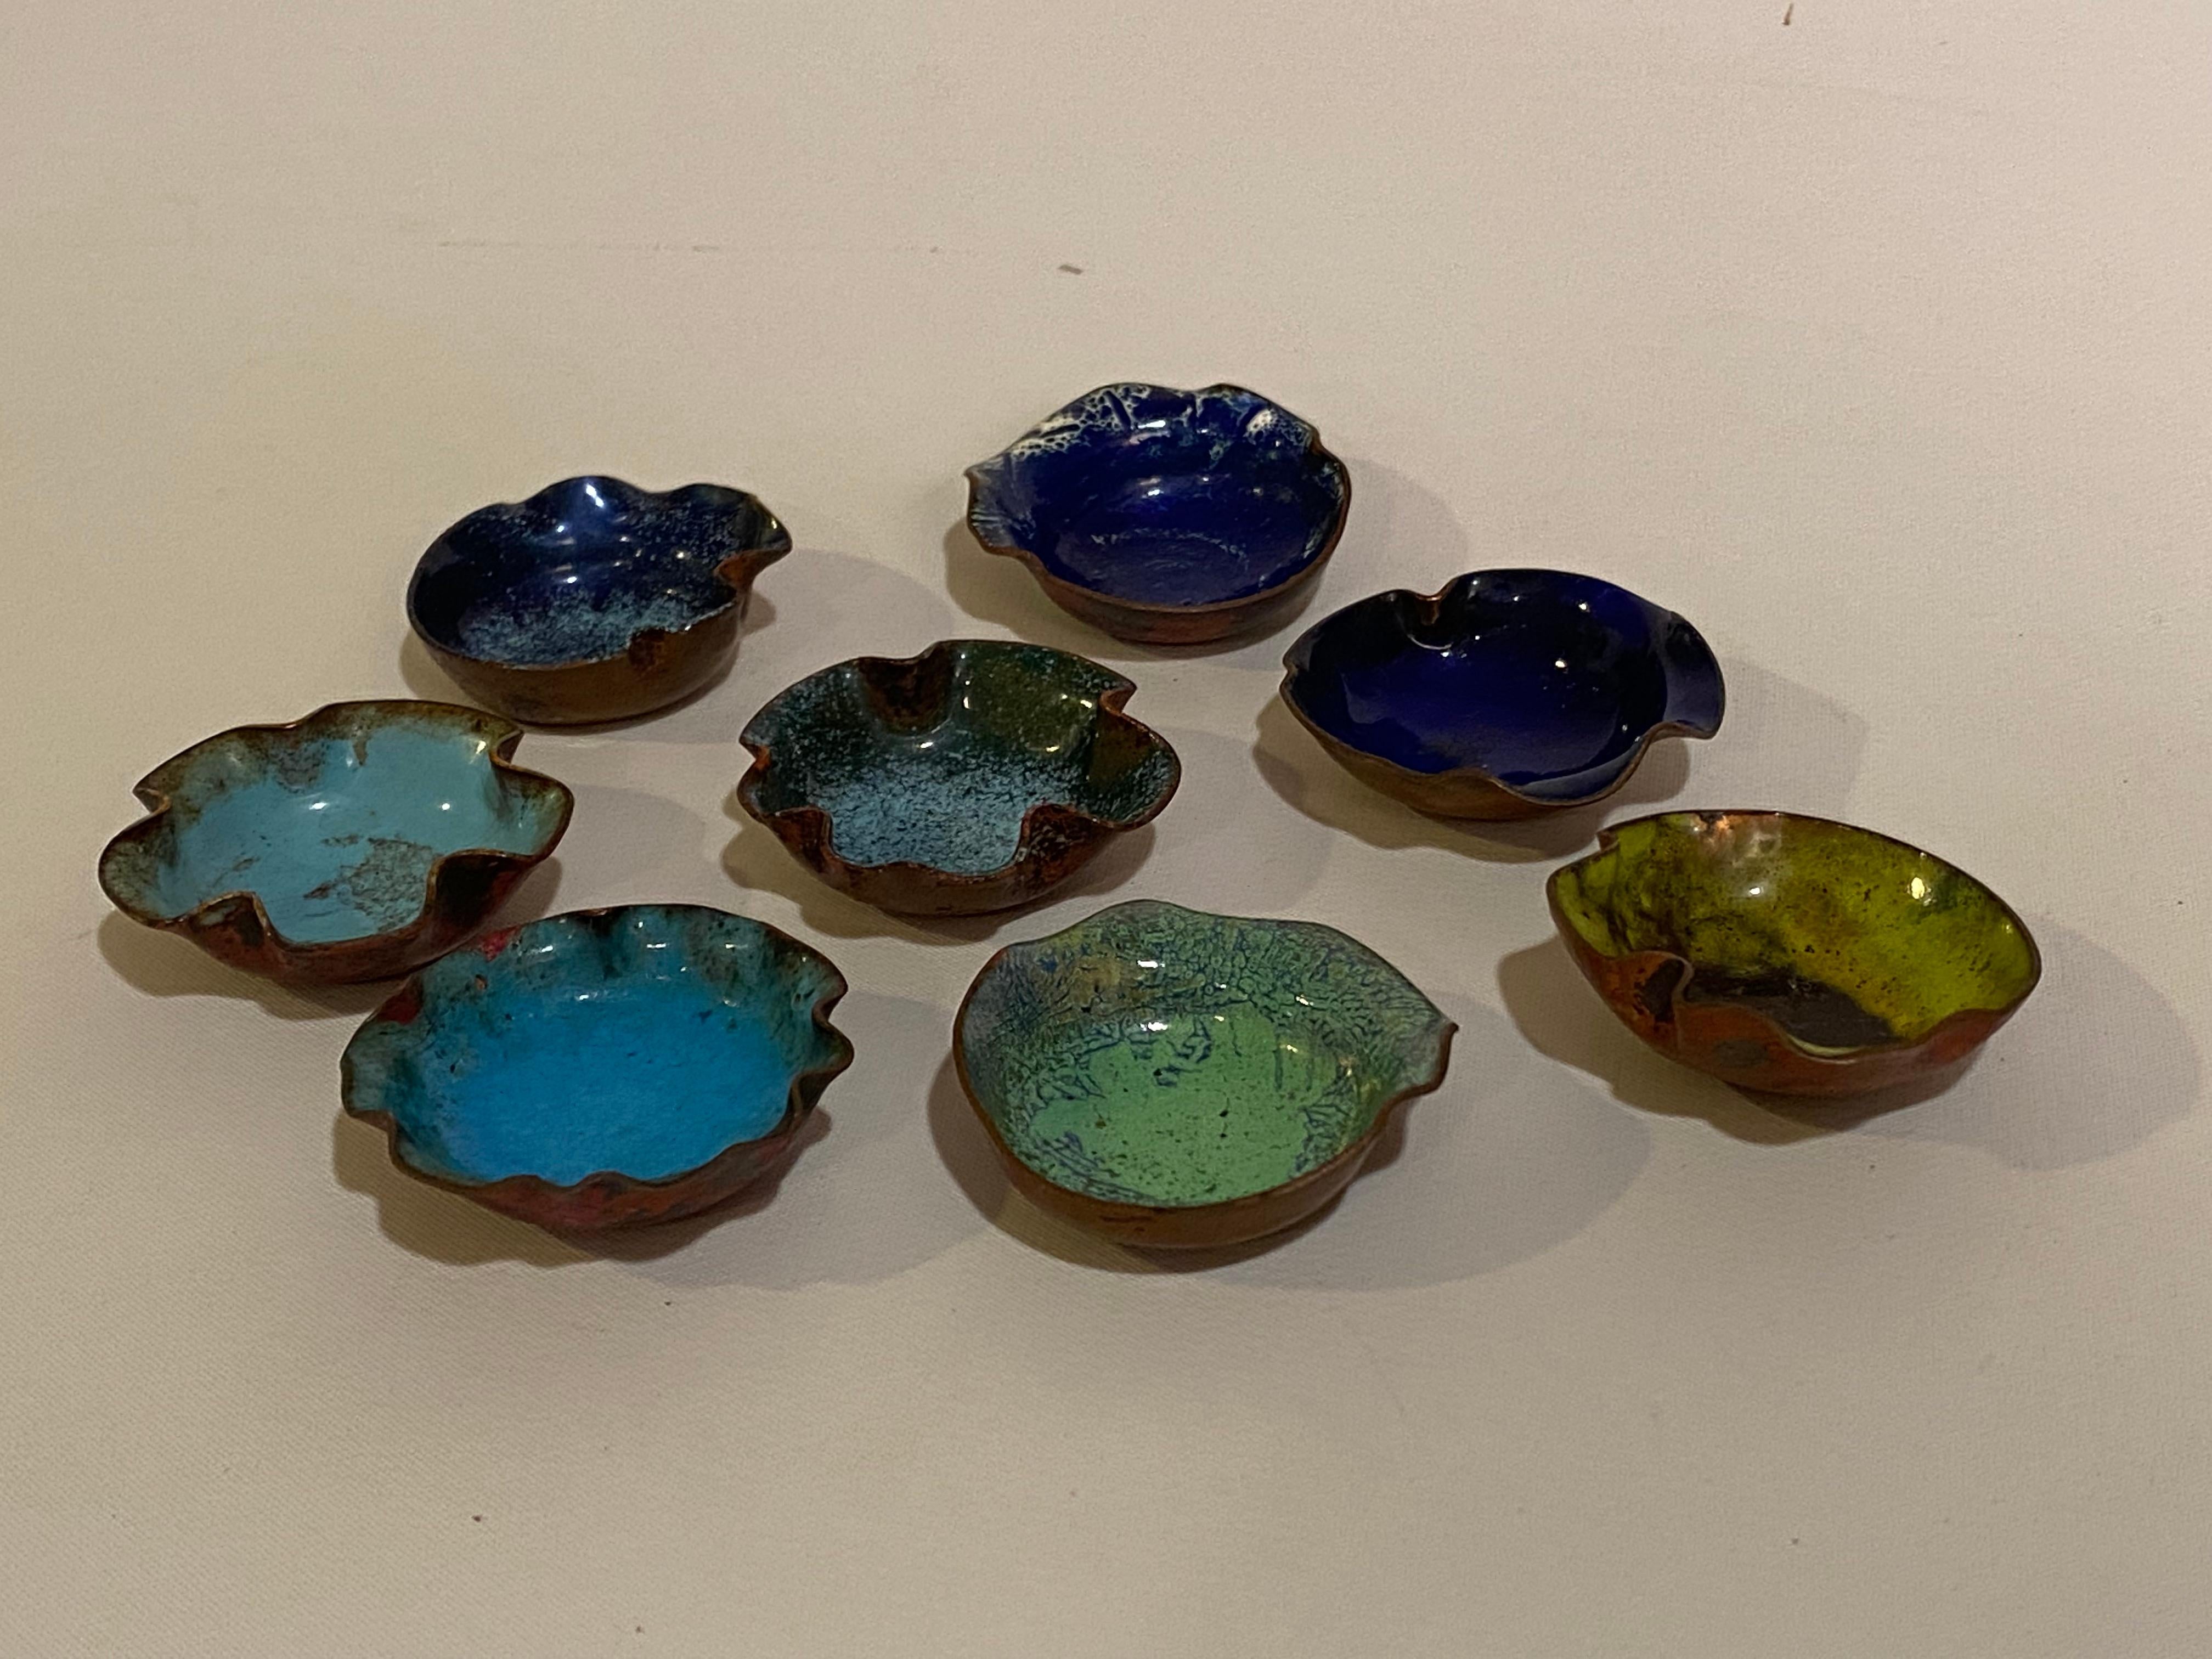 Set of eight fine Mid Century Modern biomorphic enamel on copper salts. Very distinct set of crimped and crinkled enameled salts. Circa 1965. Enameling became a huge crafts movement in the 1960s. There are so many wonderful visual and tactile